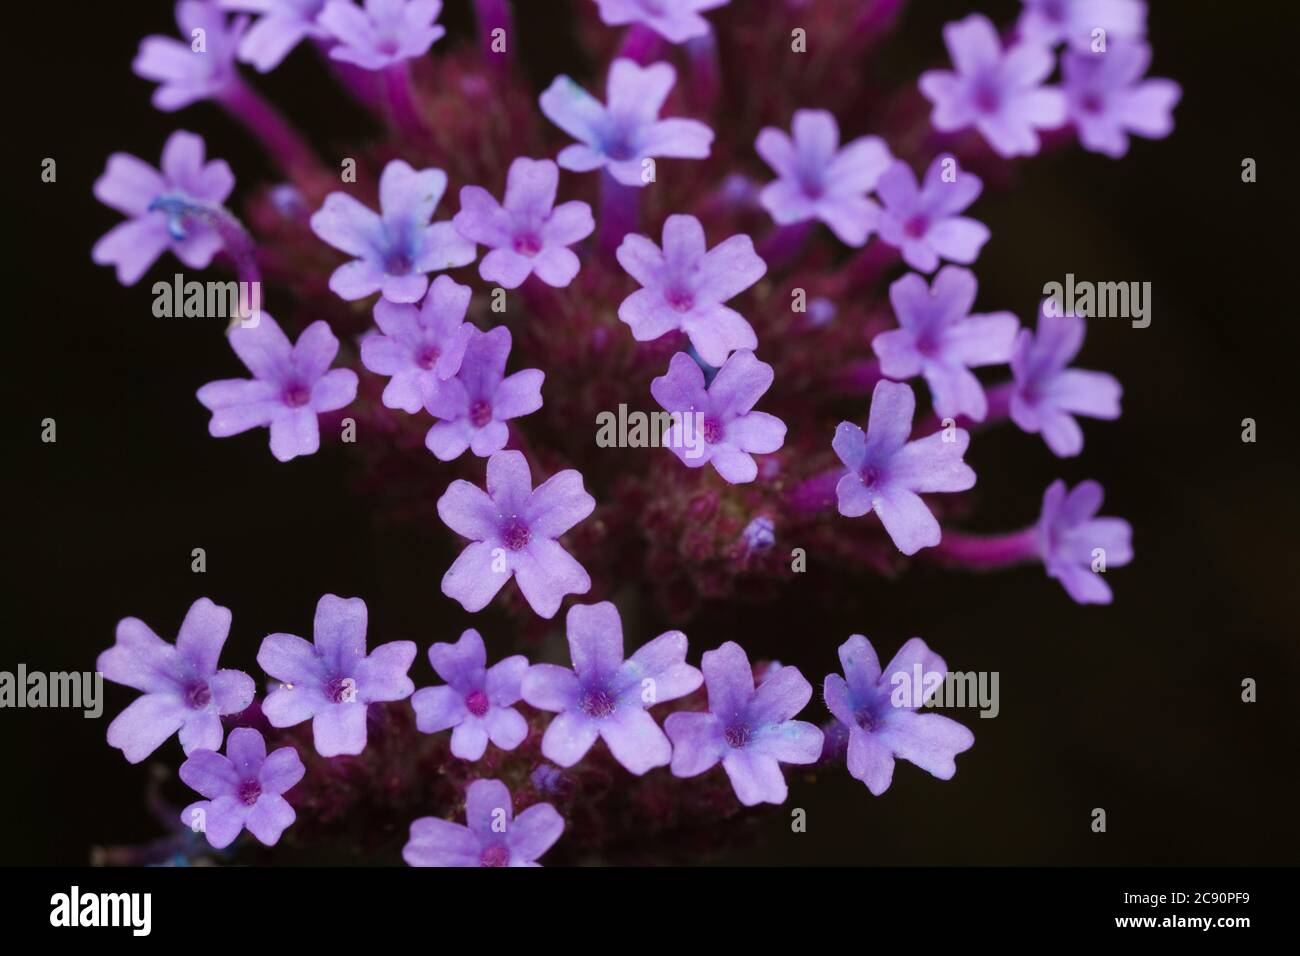 bunch of purple flowers against black background Stock Photo